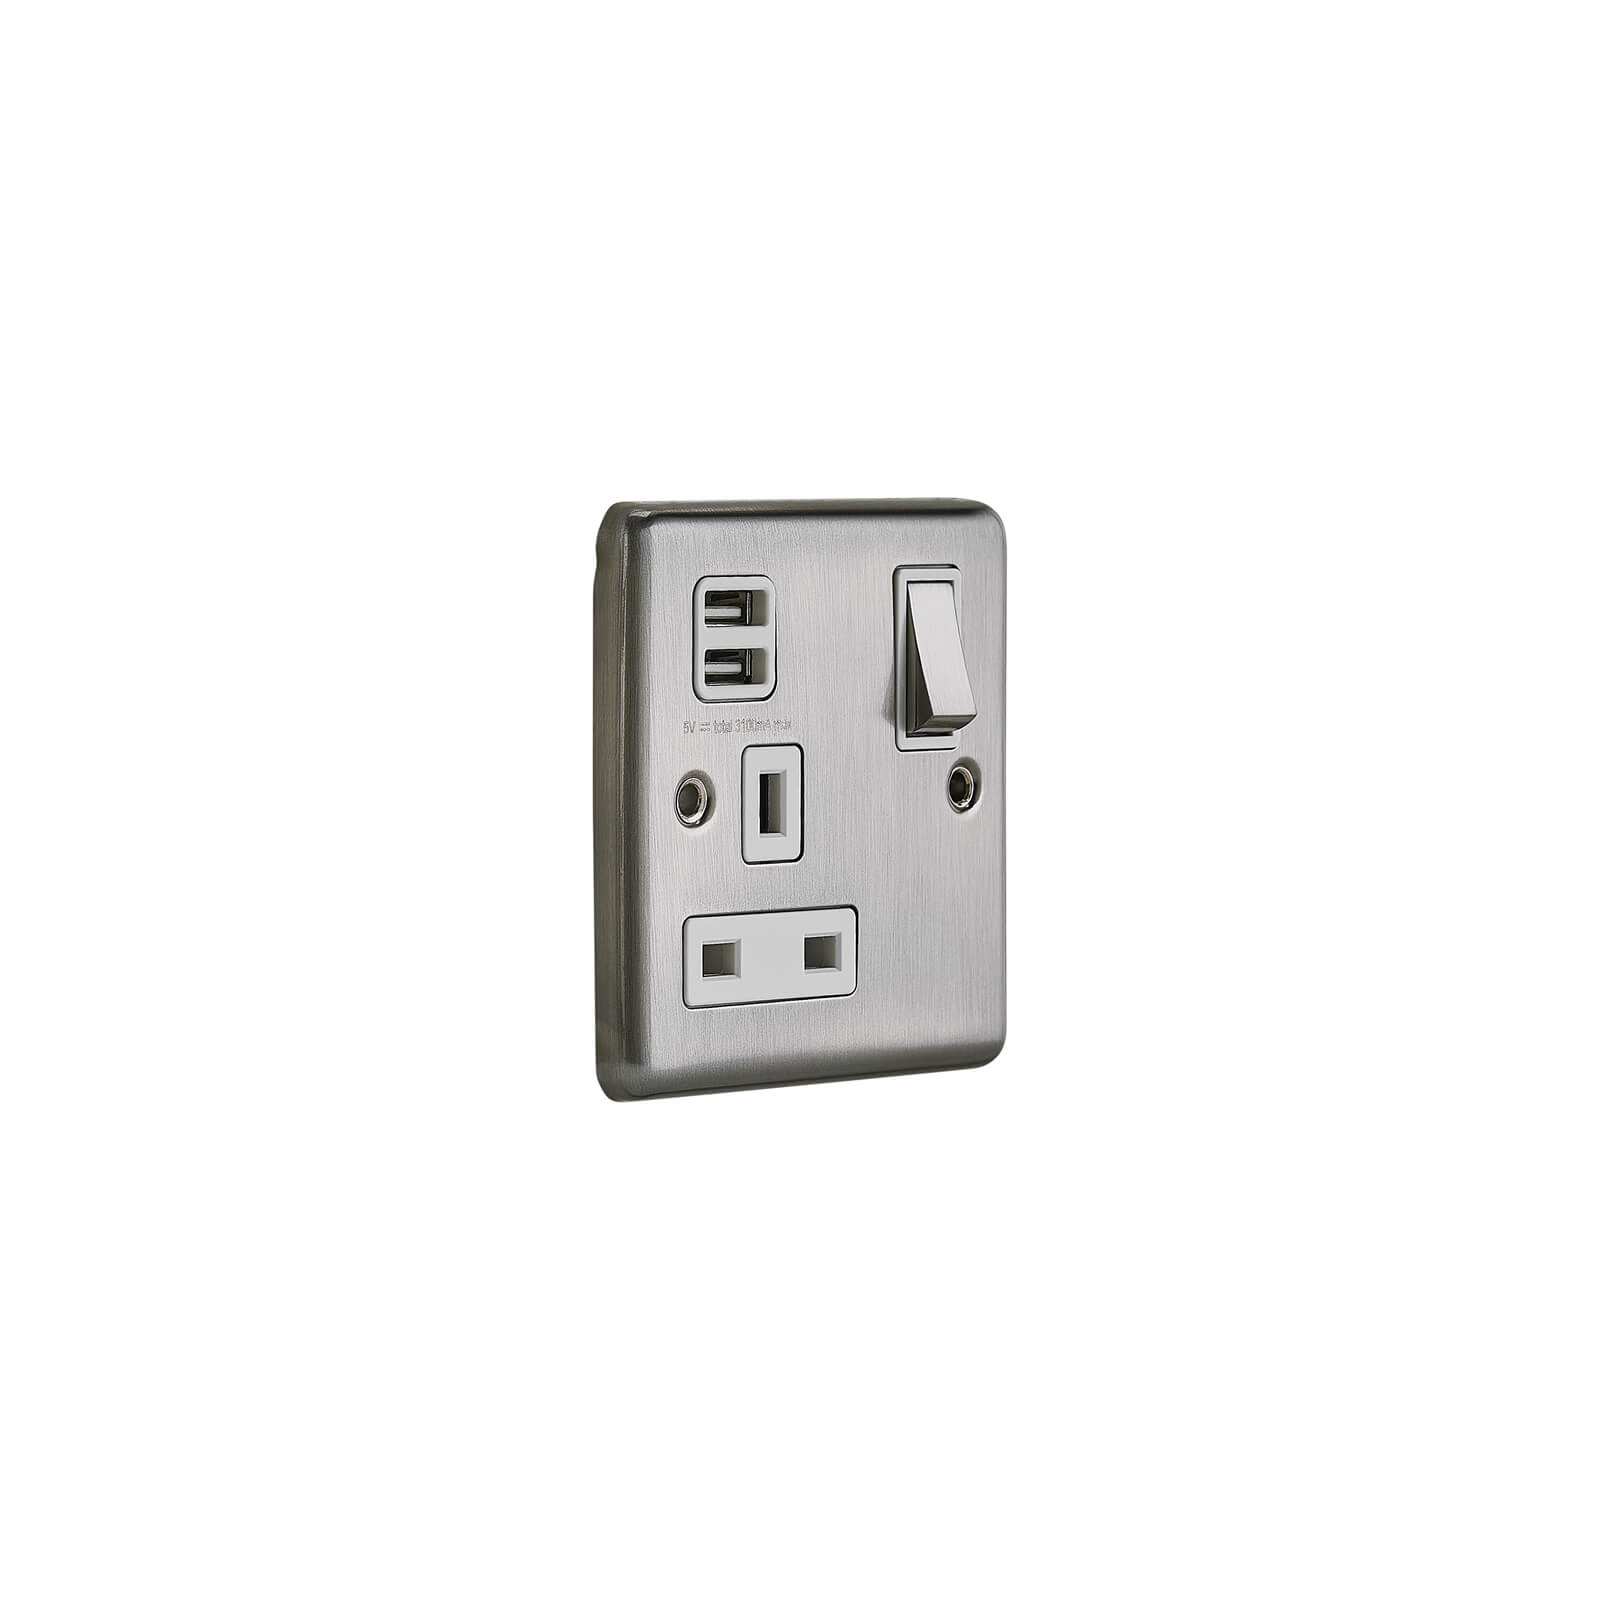 Arlec Metal Screwed 13 Amp 1 Gang Switched Socket with 2 x 2.1 Amp USB Stainless Steel